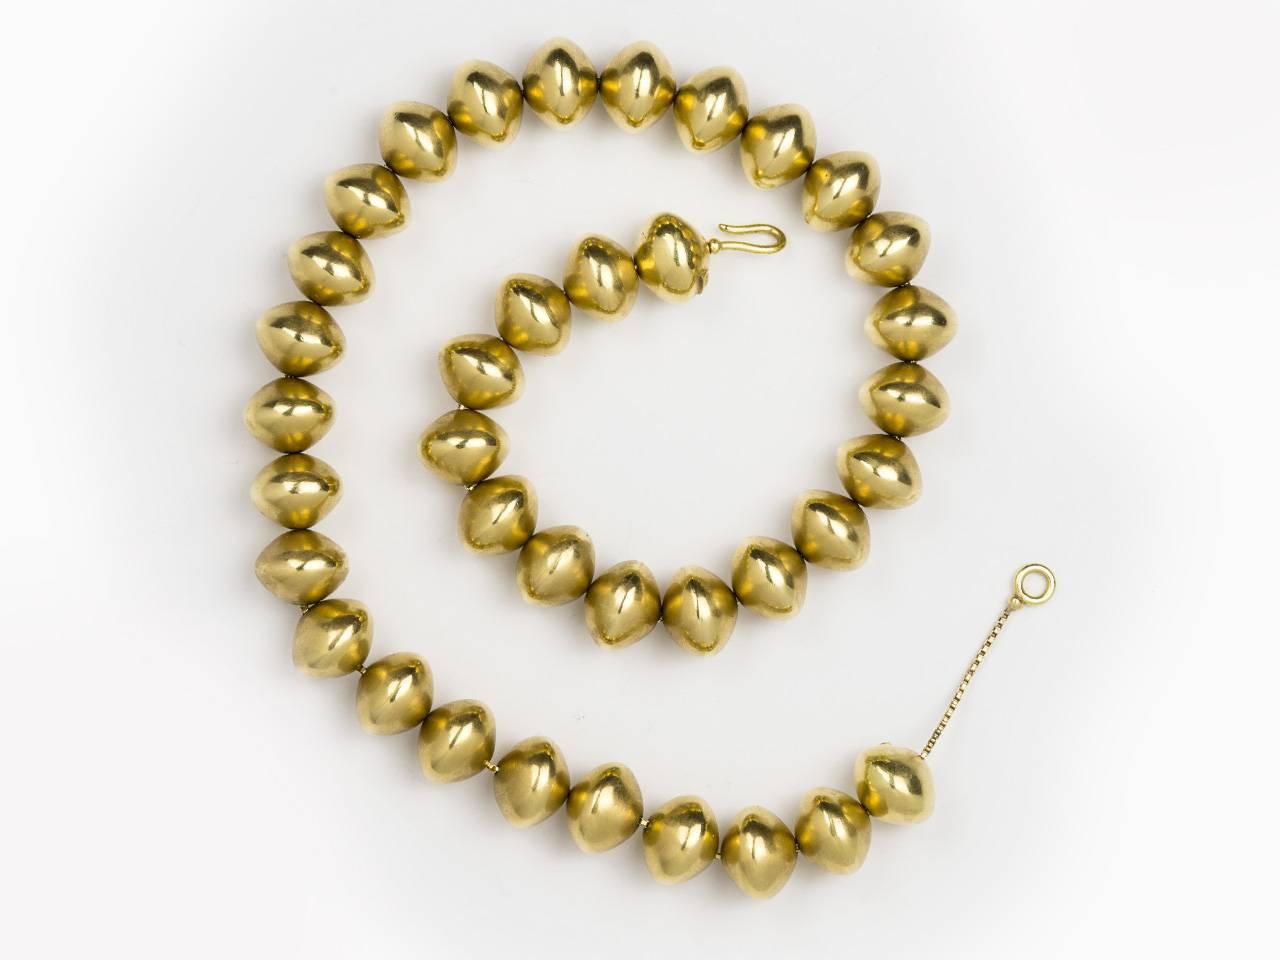 18kt gold bead necklace on a traveling chain. Signed, 1999 , 750, and 18k. 